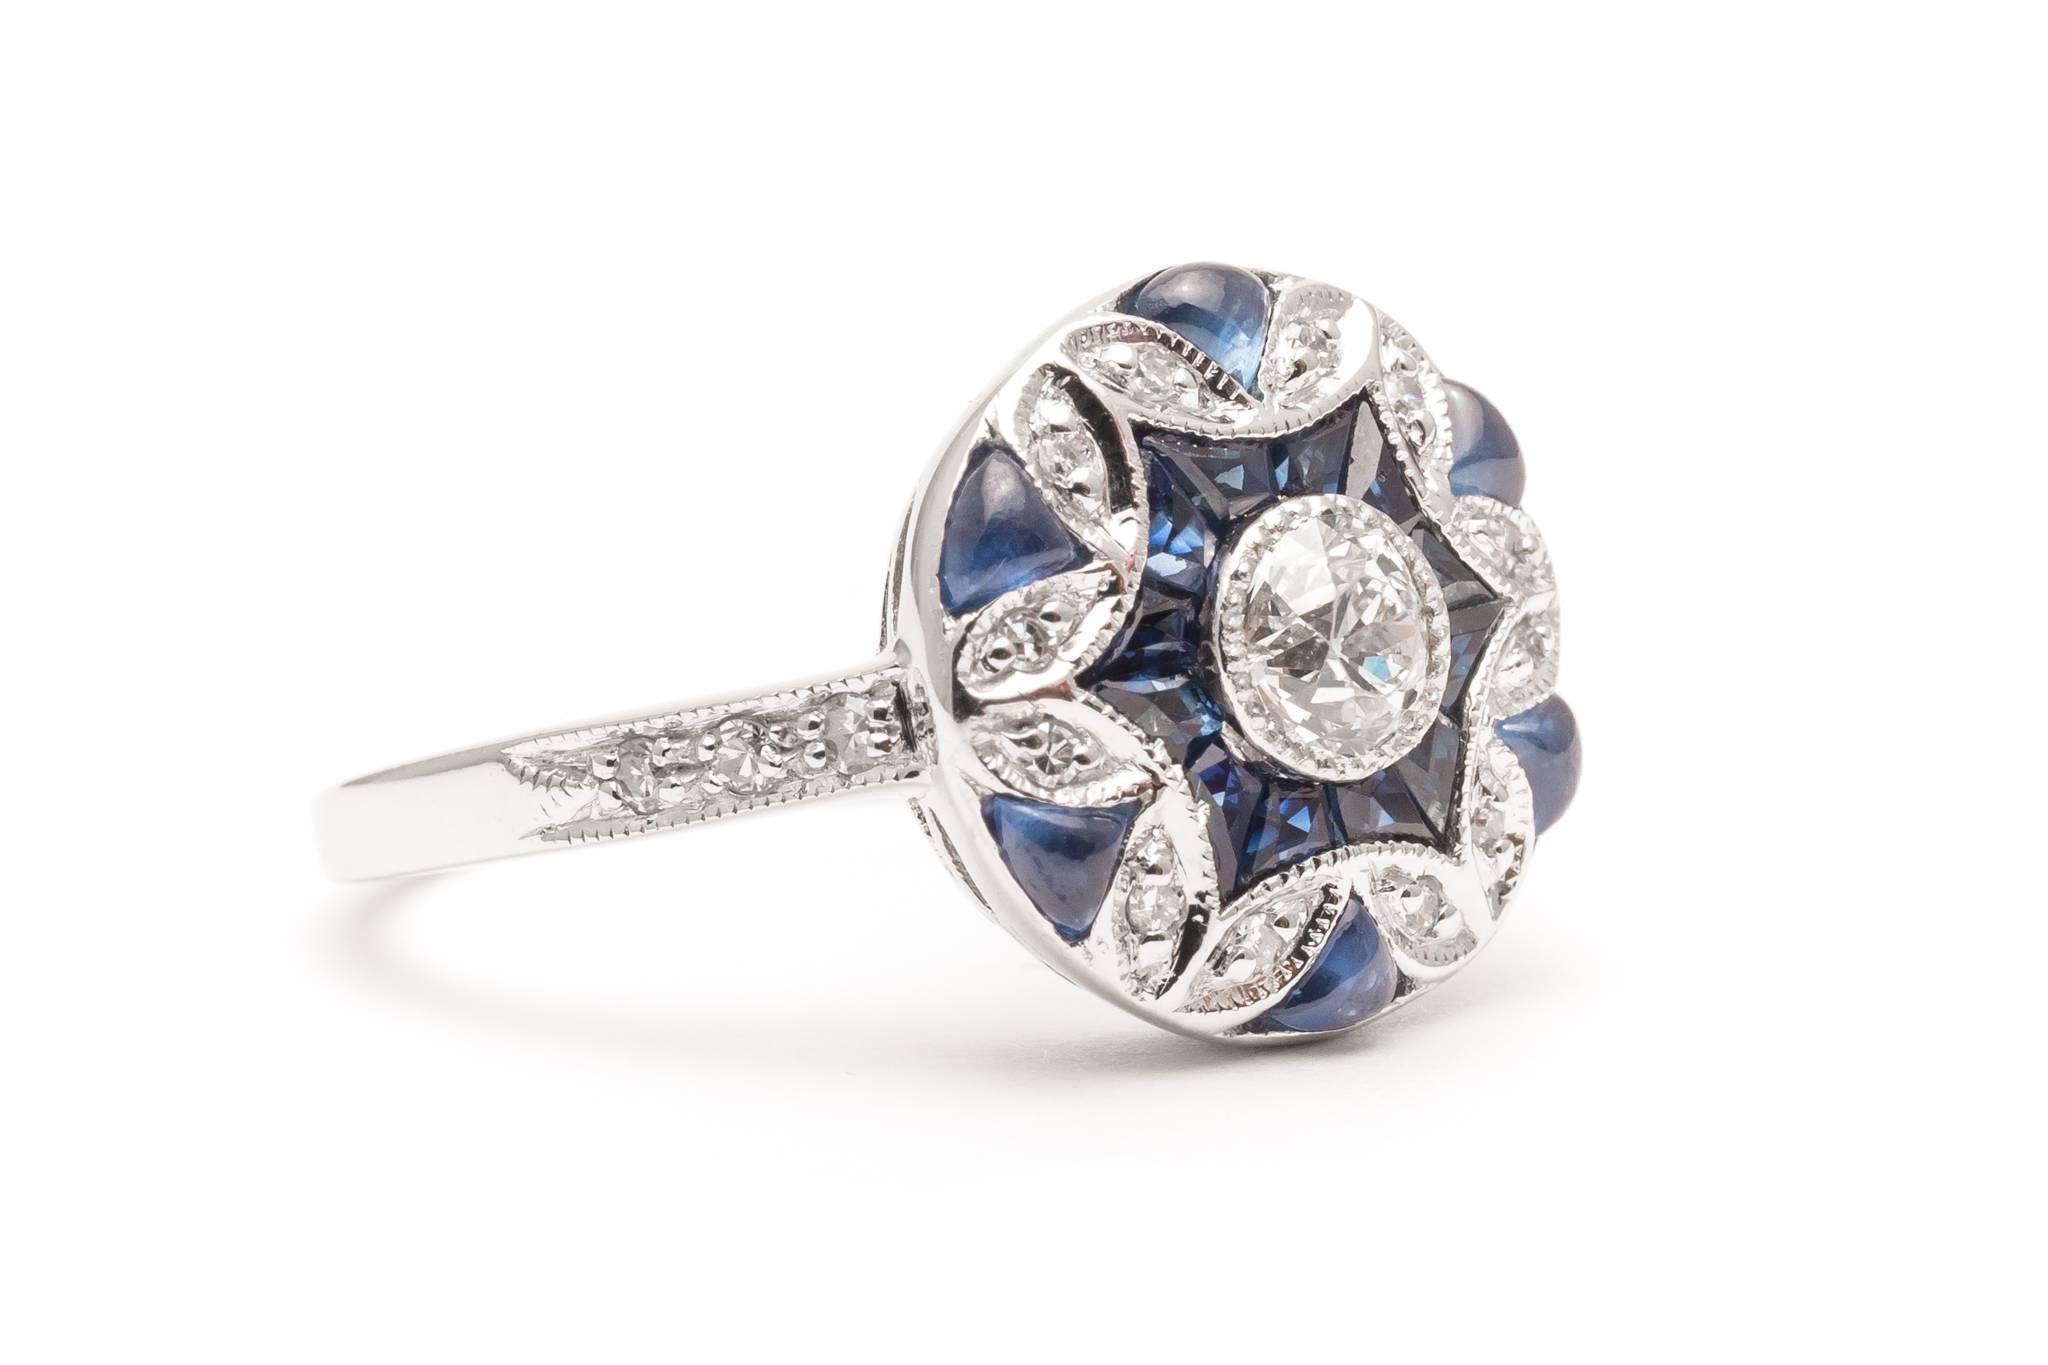 Beacon Hill Jewelers Presents:

A unique and beautiful  diamond ring in 14 karat white gold featuring French and cabochon cut sapphires. Entirely hand crafted, this spectacular ring is one of the most unique pieces we've had the pleasure of offering